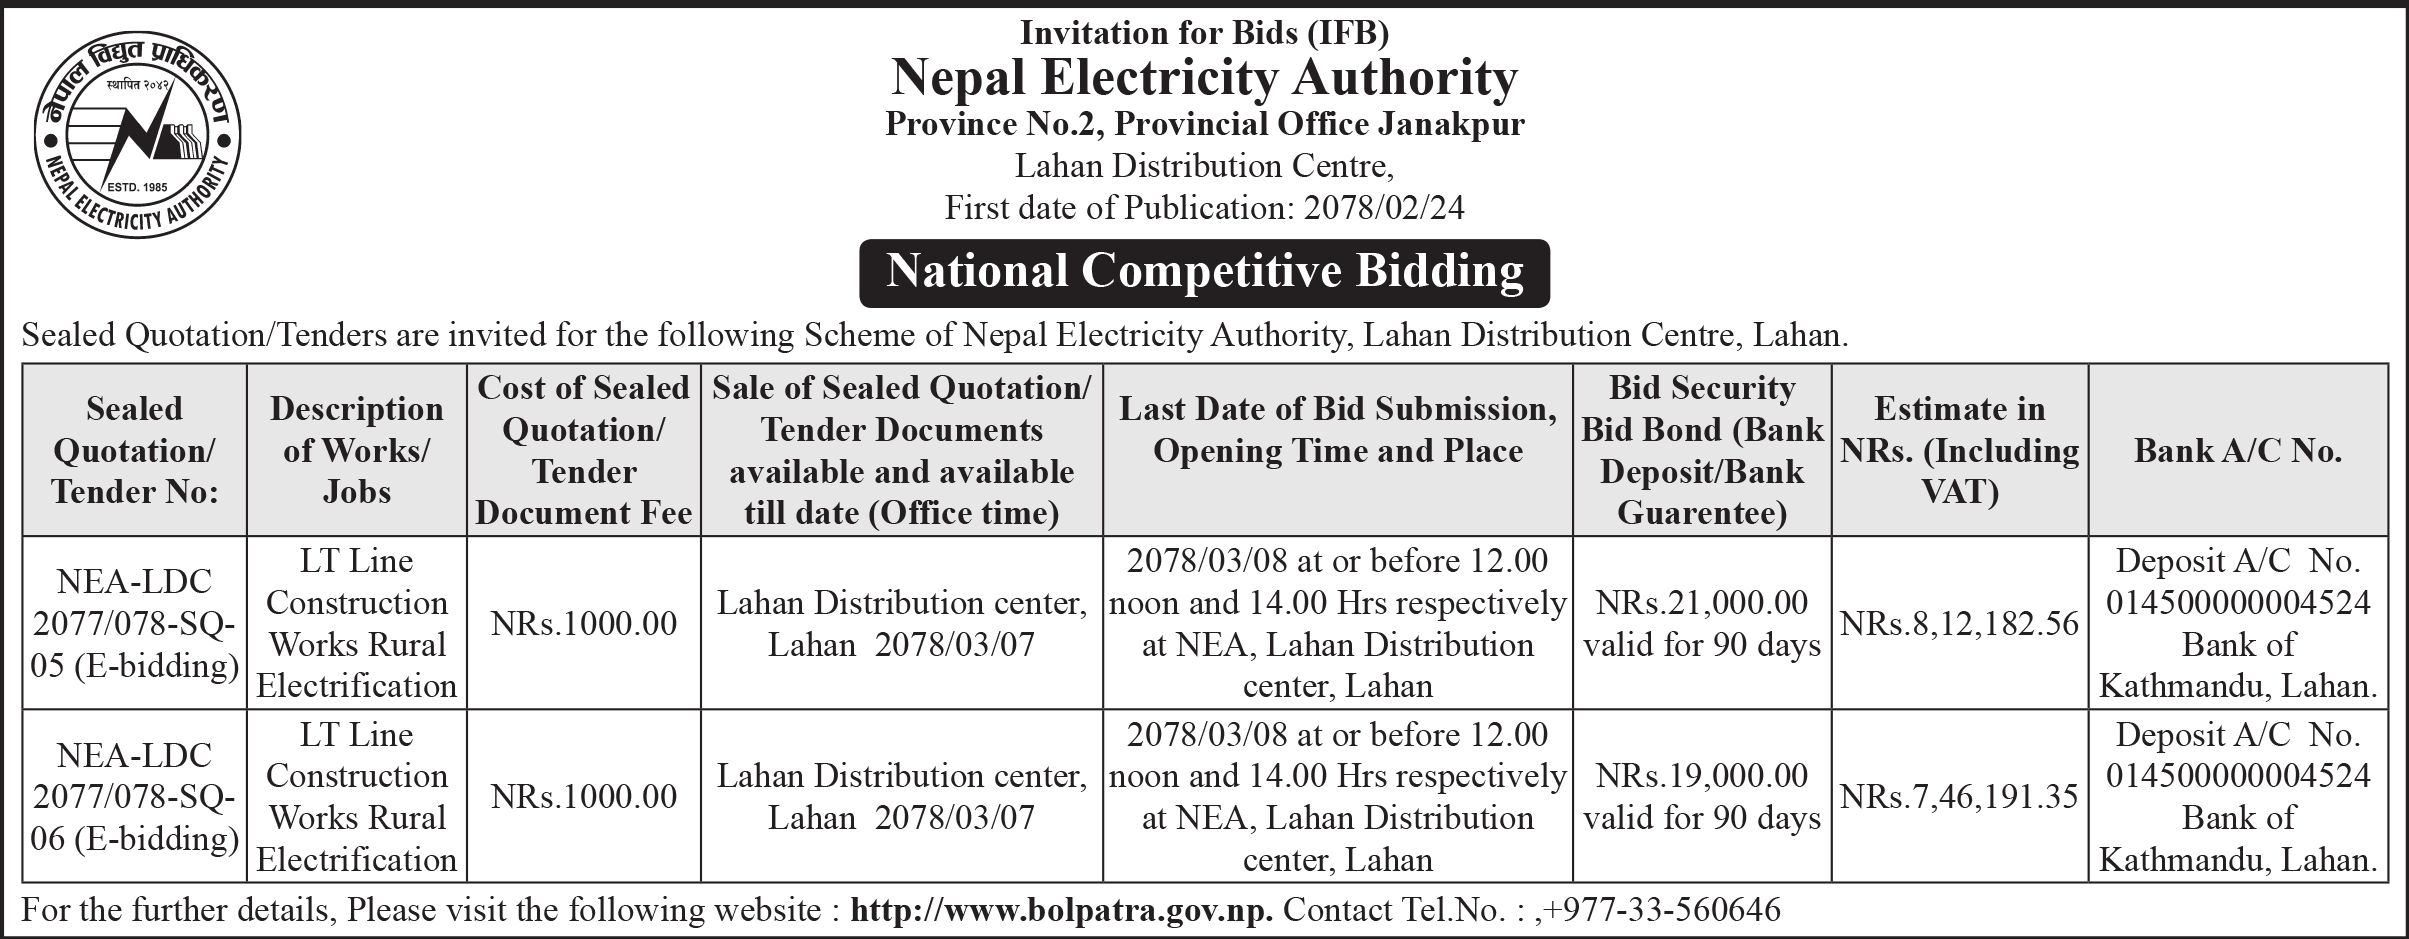 Nepal Electricity Authority, Province 2, Provincial Office Janakpur announces sealed tender for LT Line Construction works Rural Electrification for Lahan Distribution Center. Interested Biddercan apply their bid till 2078/03/08, 12 noon. Image 3.png